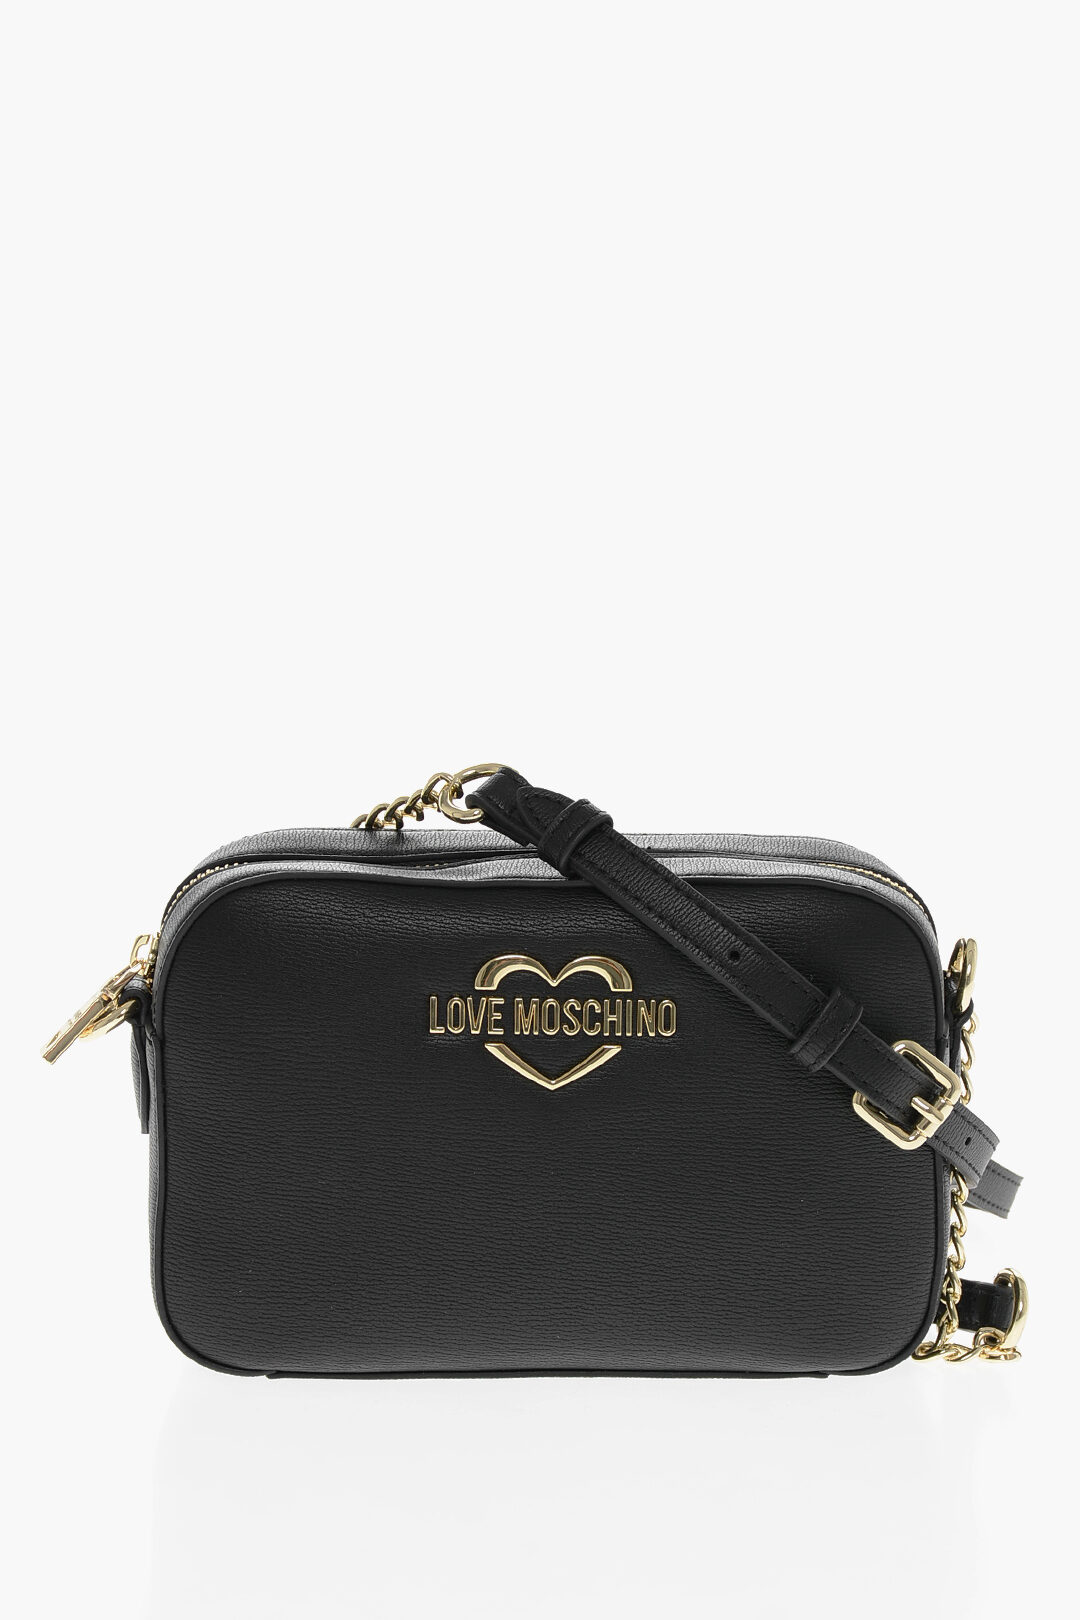 Love Faux Leather Crossbody Bag with Golden Details Size unica